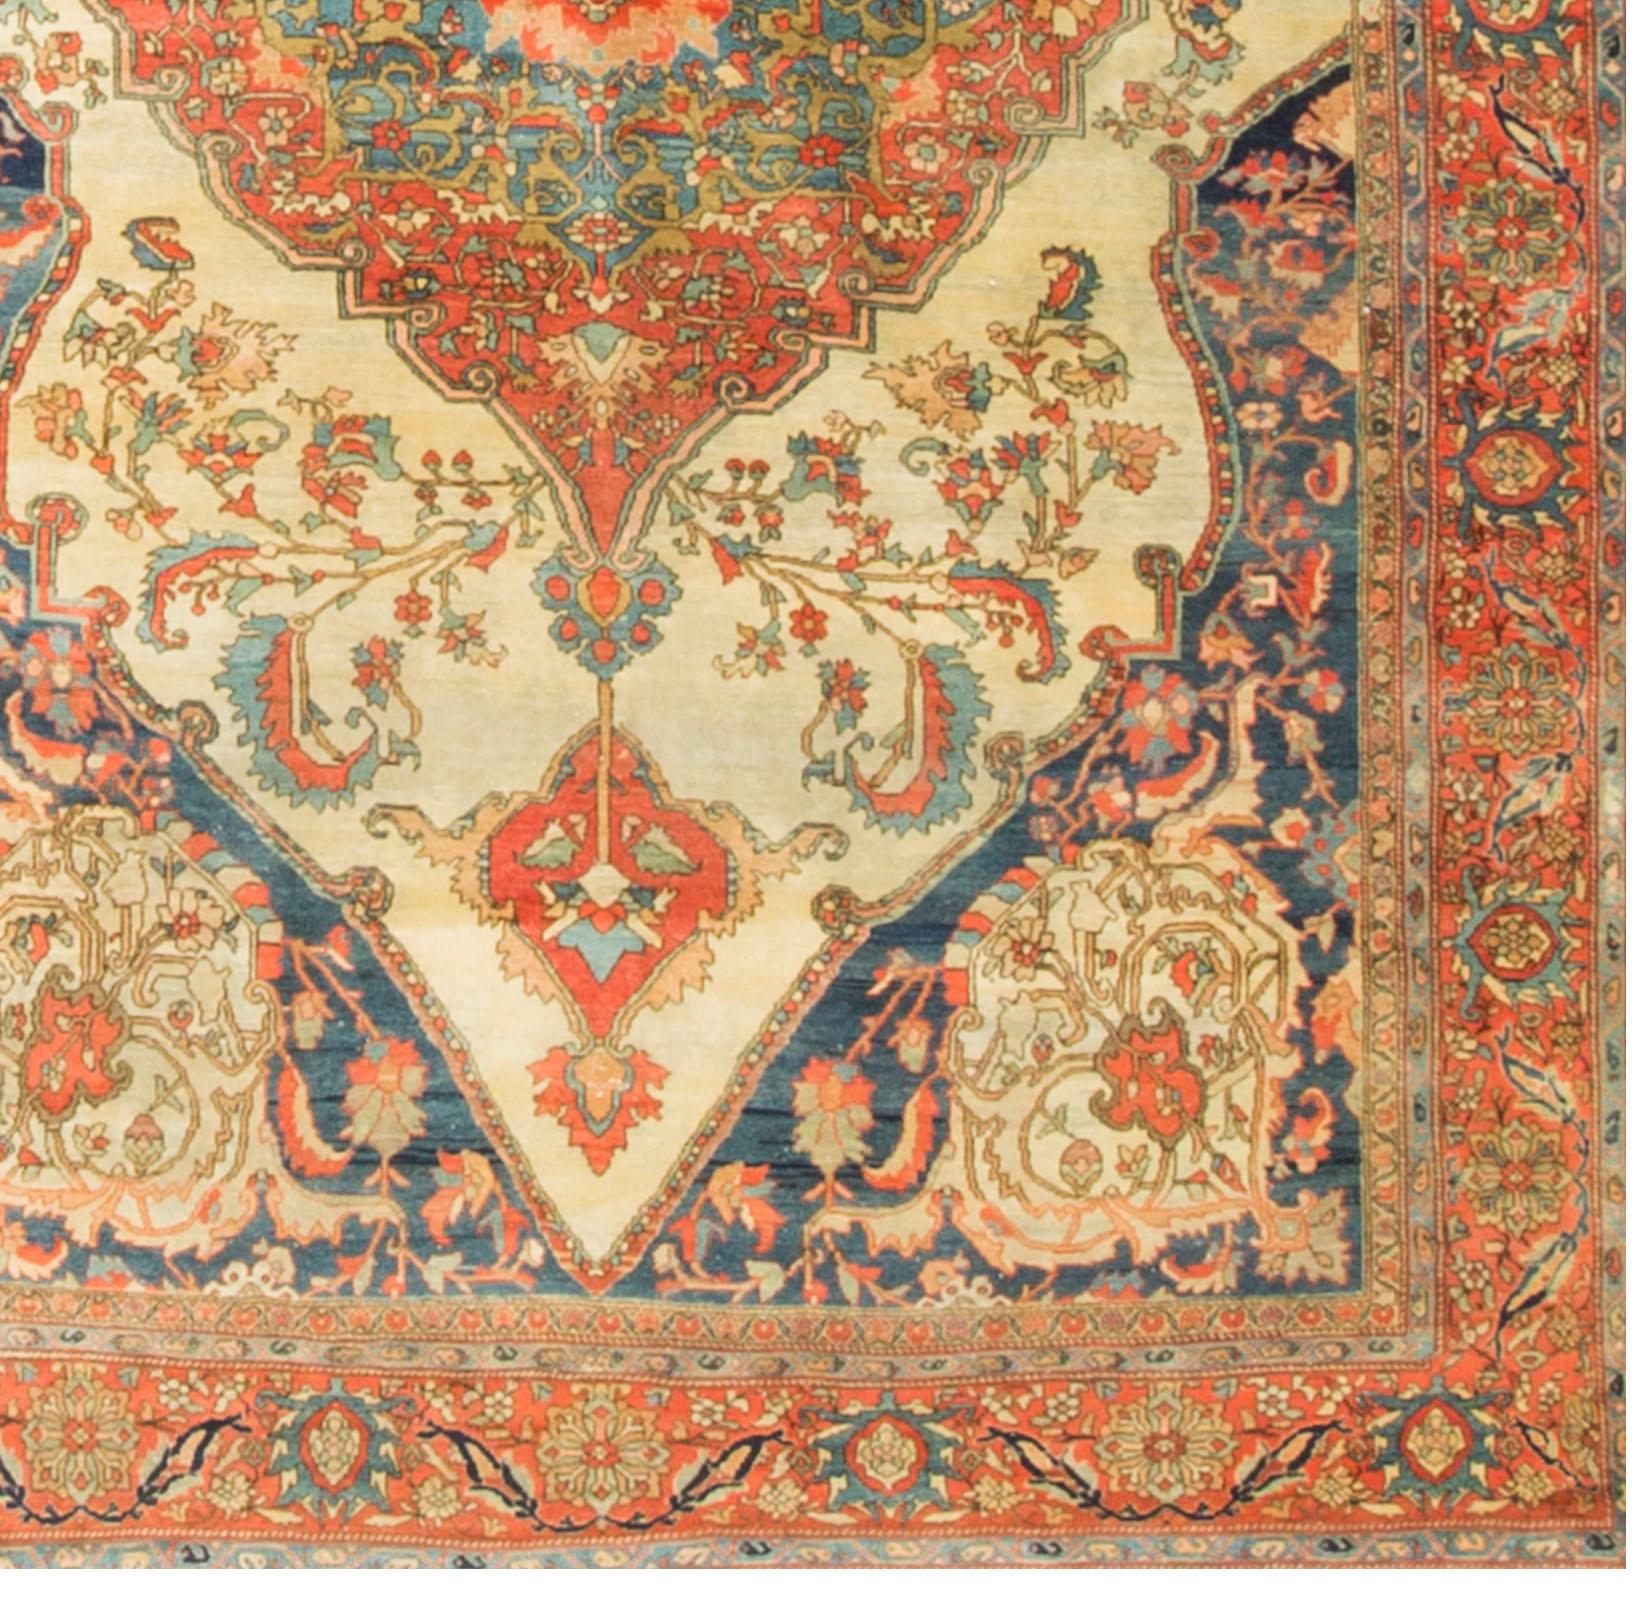 Antique Persian Sarouk Feraghan rug carpet, circa 1900. A stunning antique circa 1900 Sarouk Feraghan rug. The central medallions ever increasing in size and finally enclosed in a blue ground with four glorious floral spandrels to create a powerful